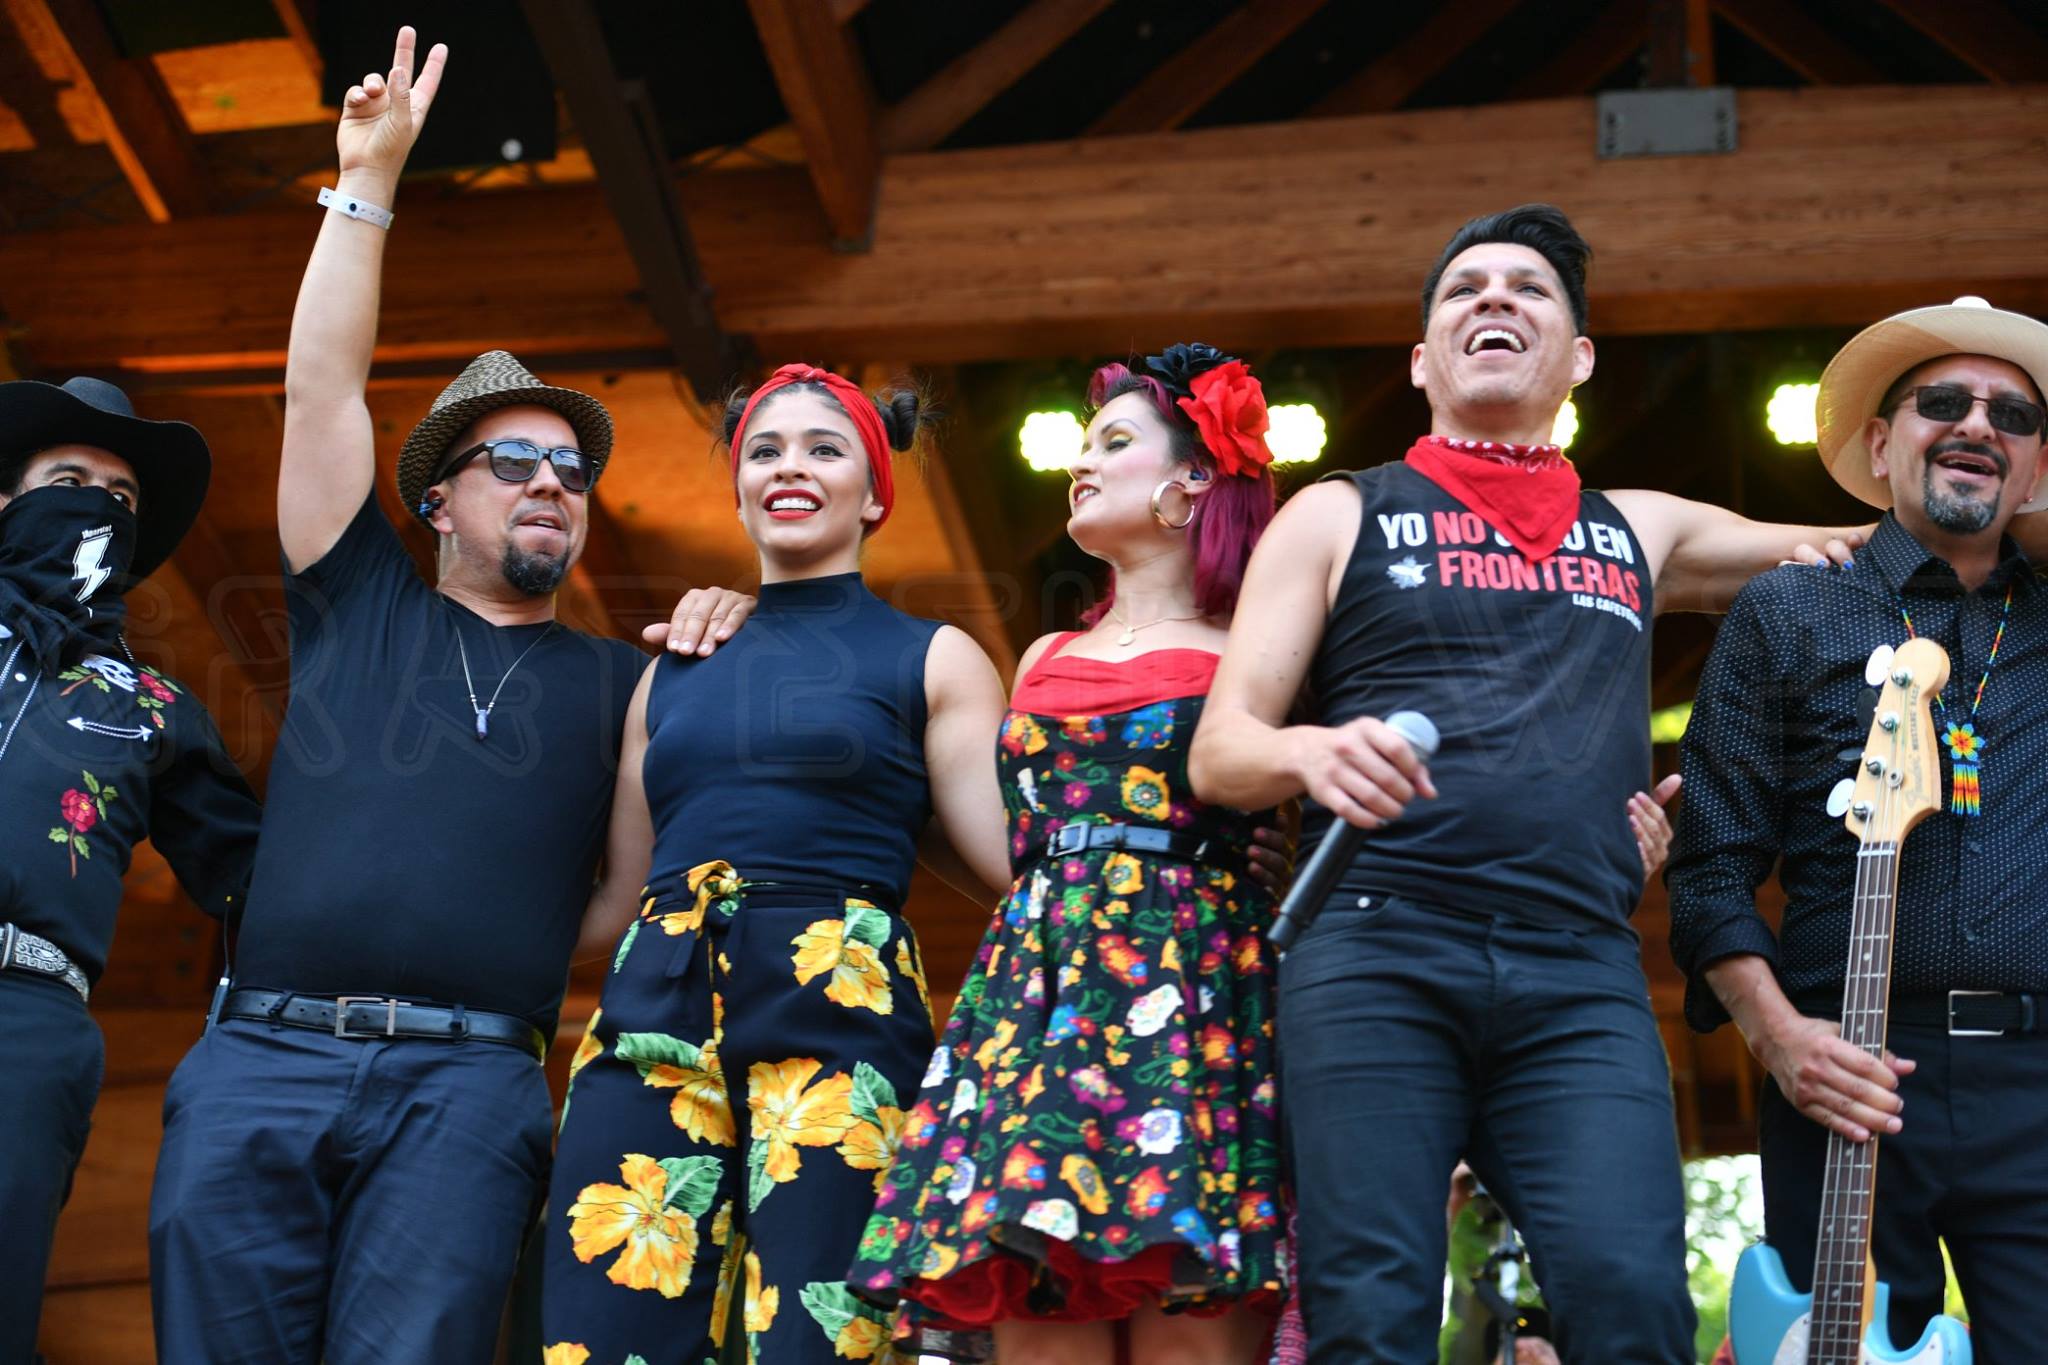 Las Cafeteras brought an important message and delightful music to Folks Fest 2018